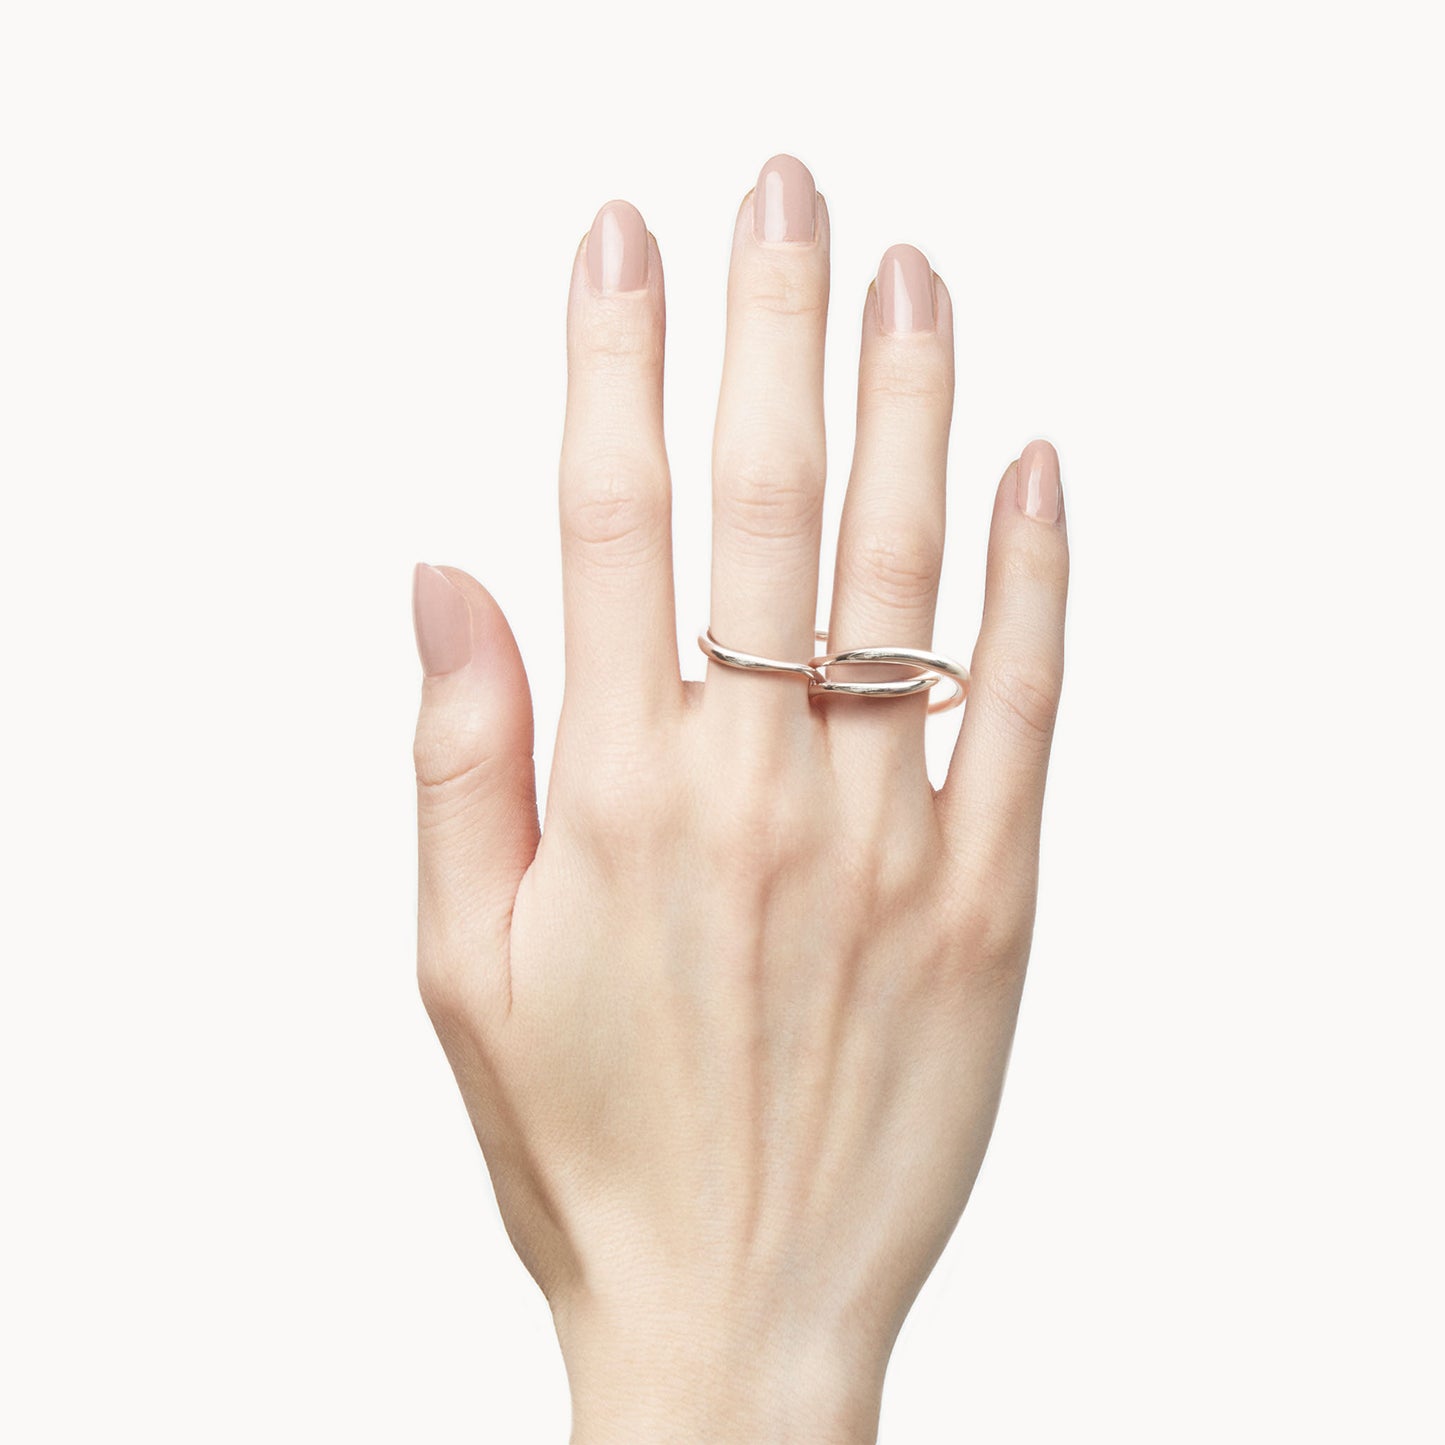 Double Finger Ring ダブルフィンガーリング